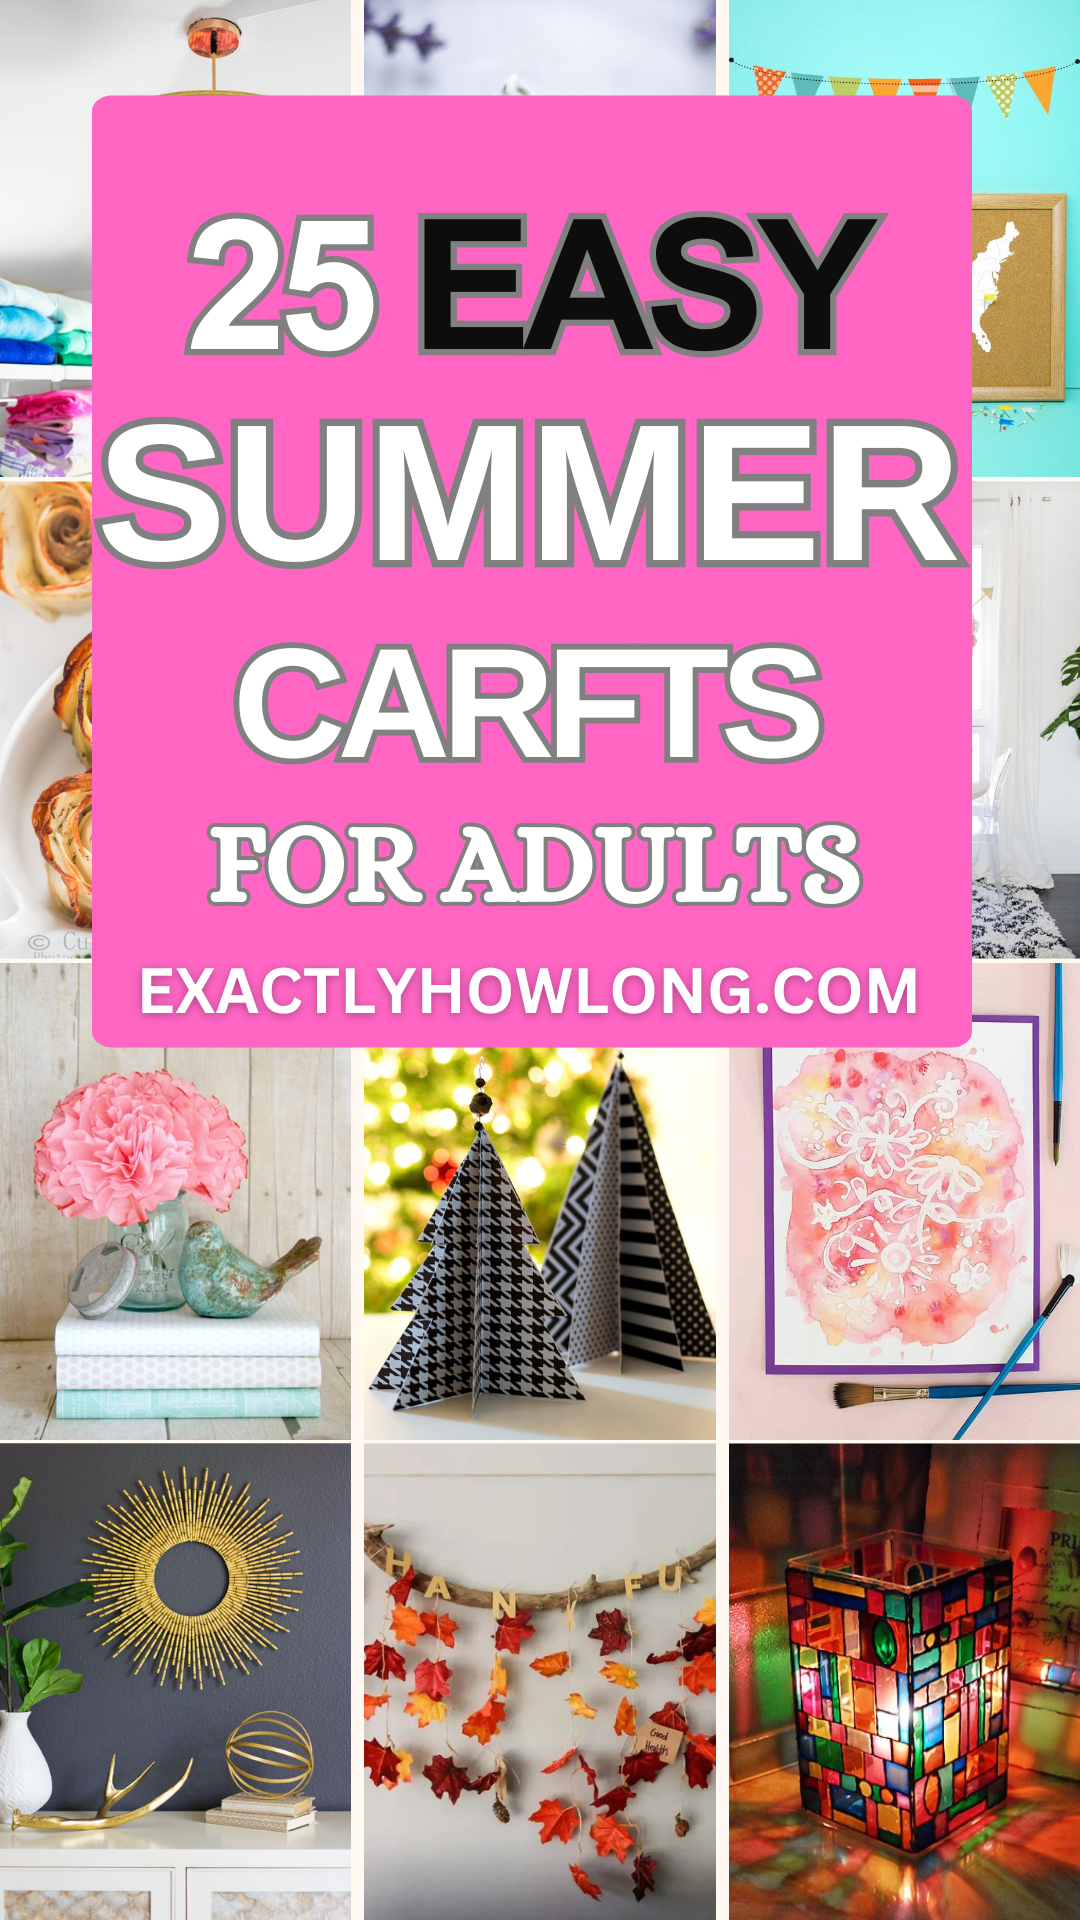 Exciting dollar store DIY crafts for adults to enjoy during the summer season